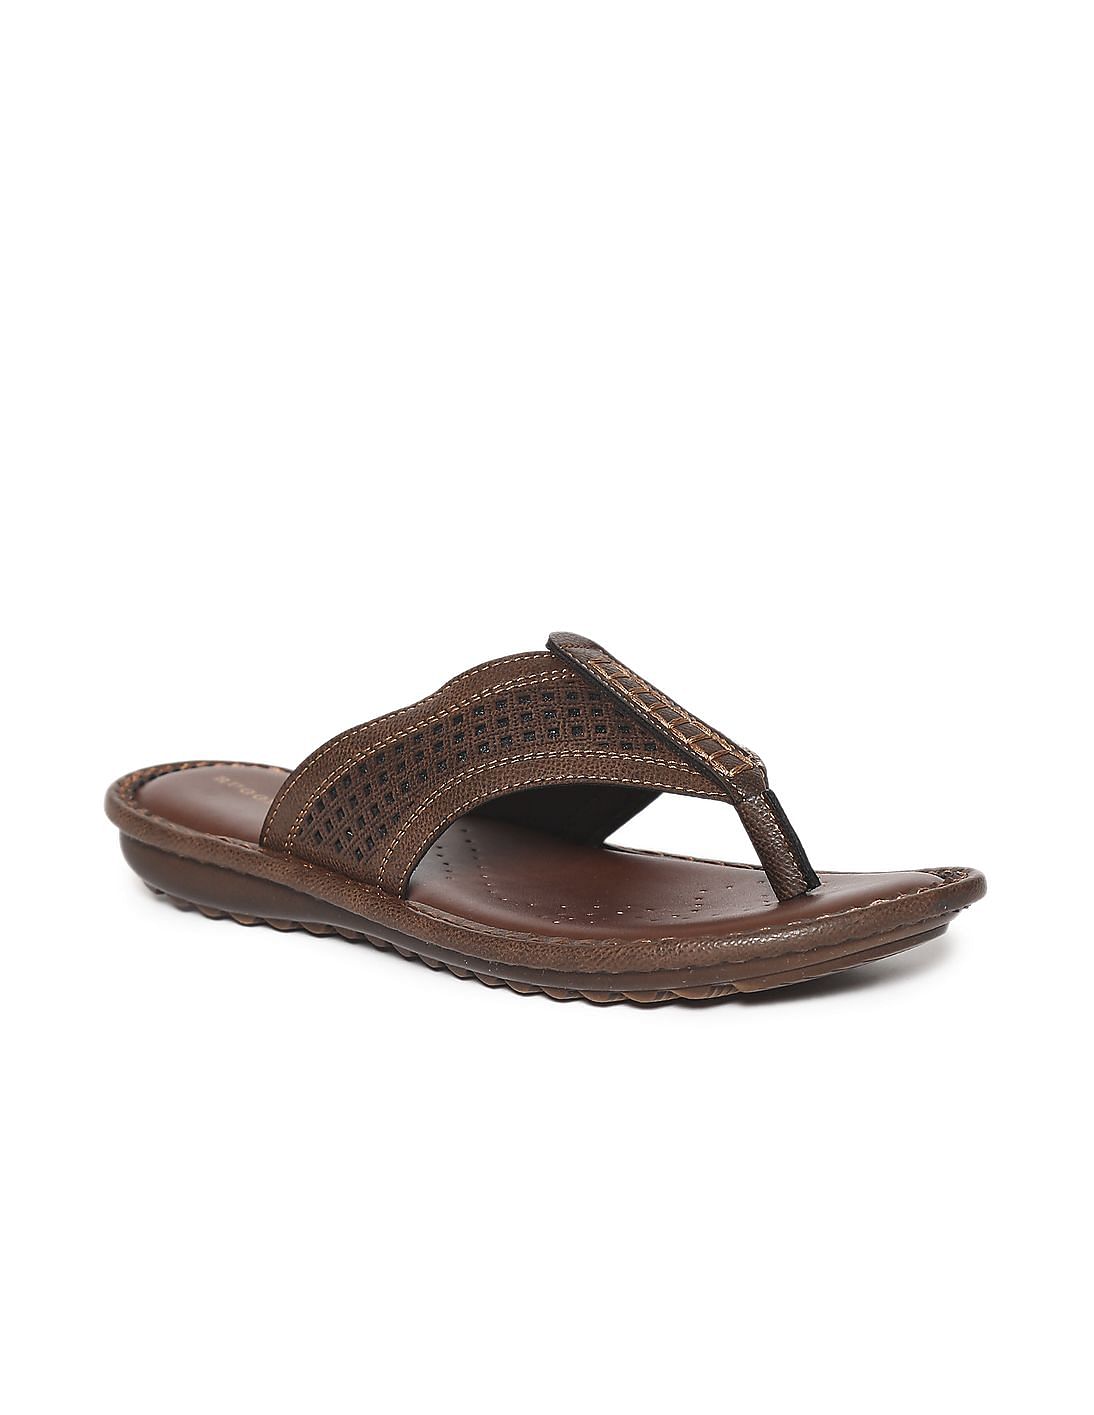 Buy Ruggers Brown Broad Laser Cut Strap Sandals - NNNOW.com